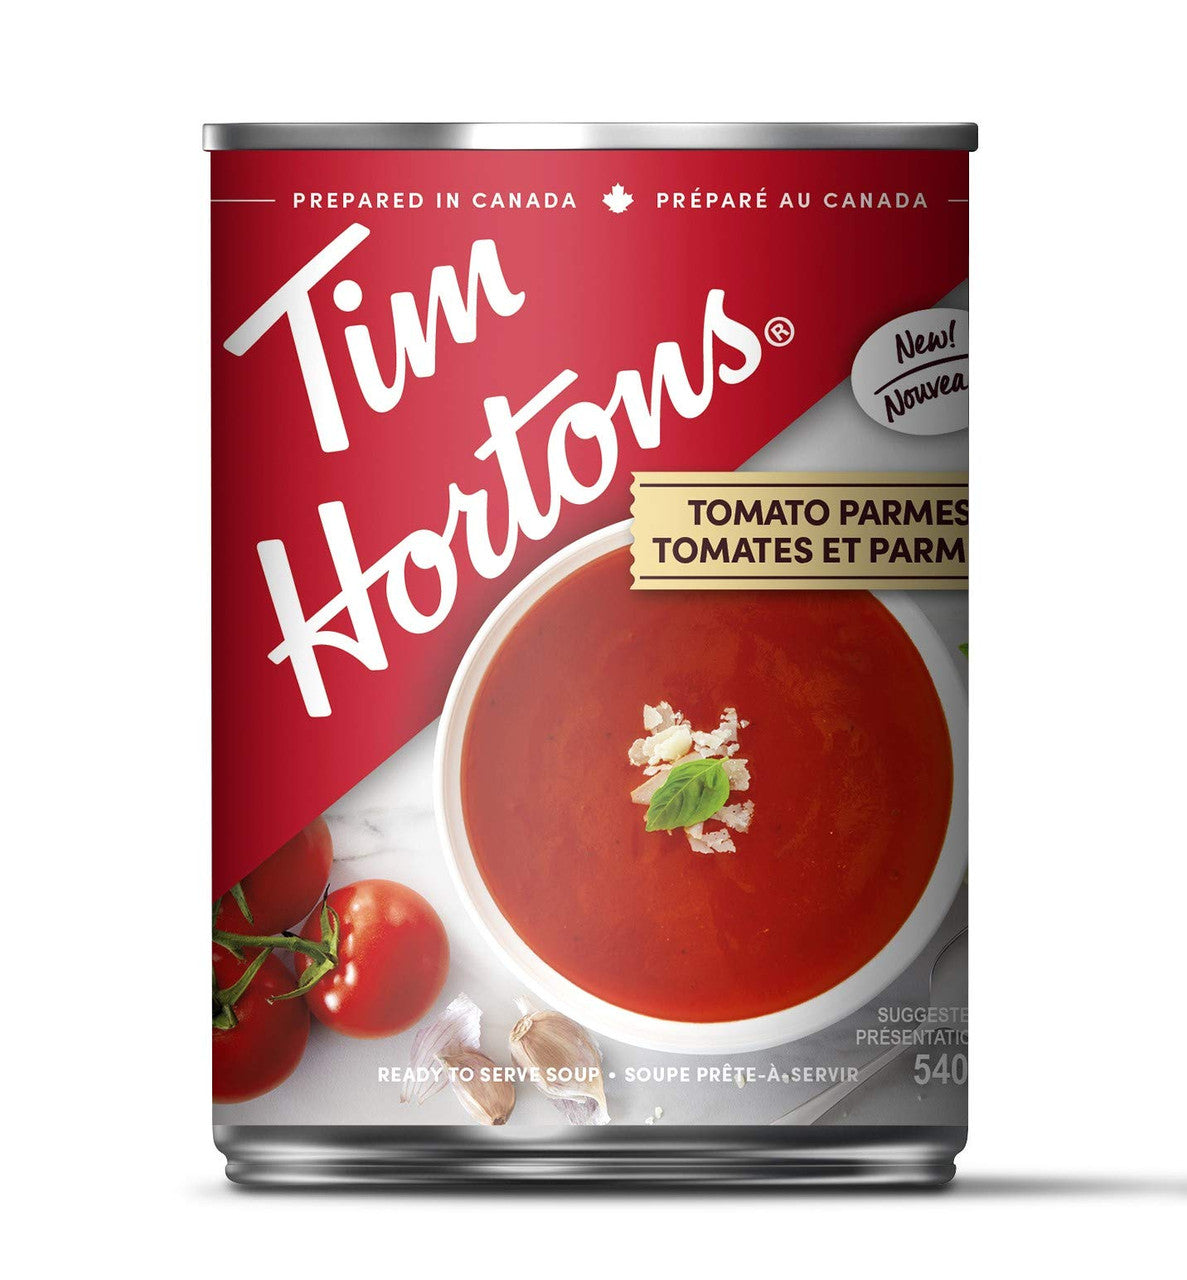 Tim Hortons Tomato Parmesan Tin of Soup, 540ml/18 fl. oz., {Imported from Canada}